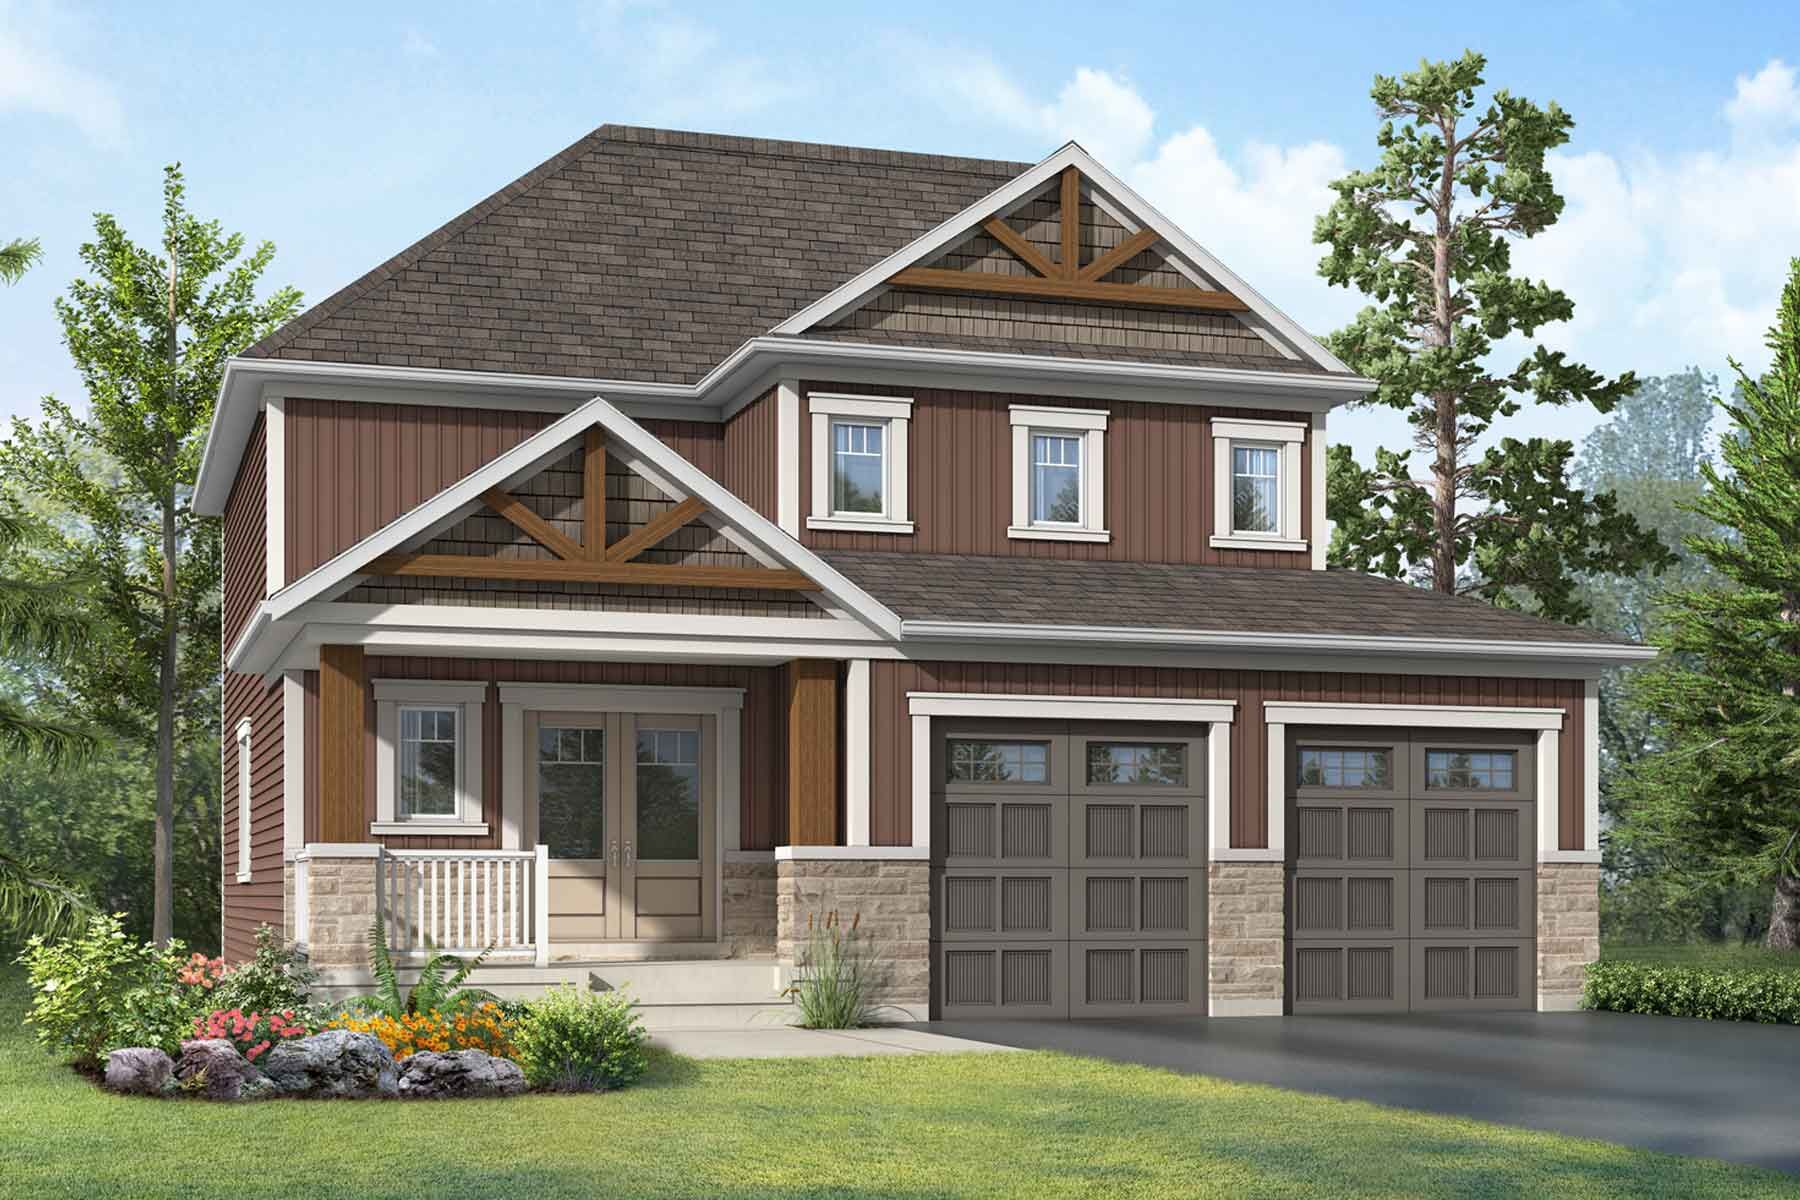 A Muskoka style elevation with double car garage, covered entrance and red siding. 